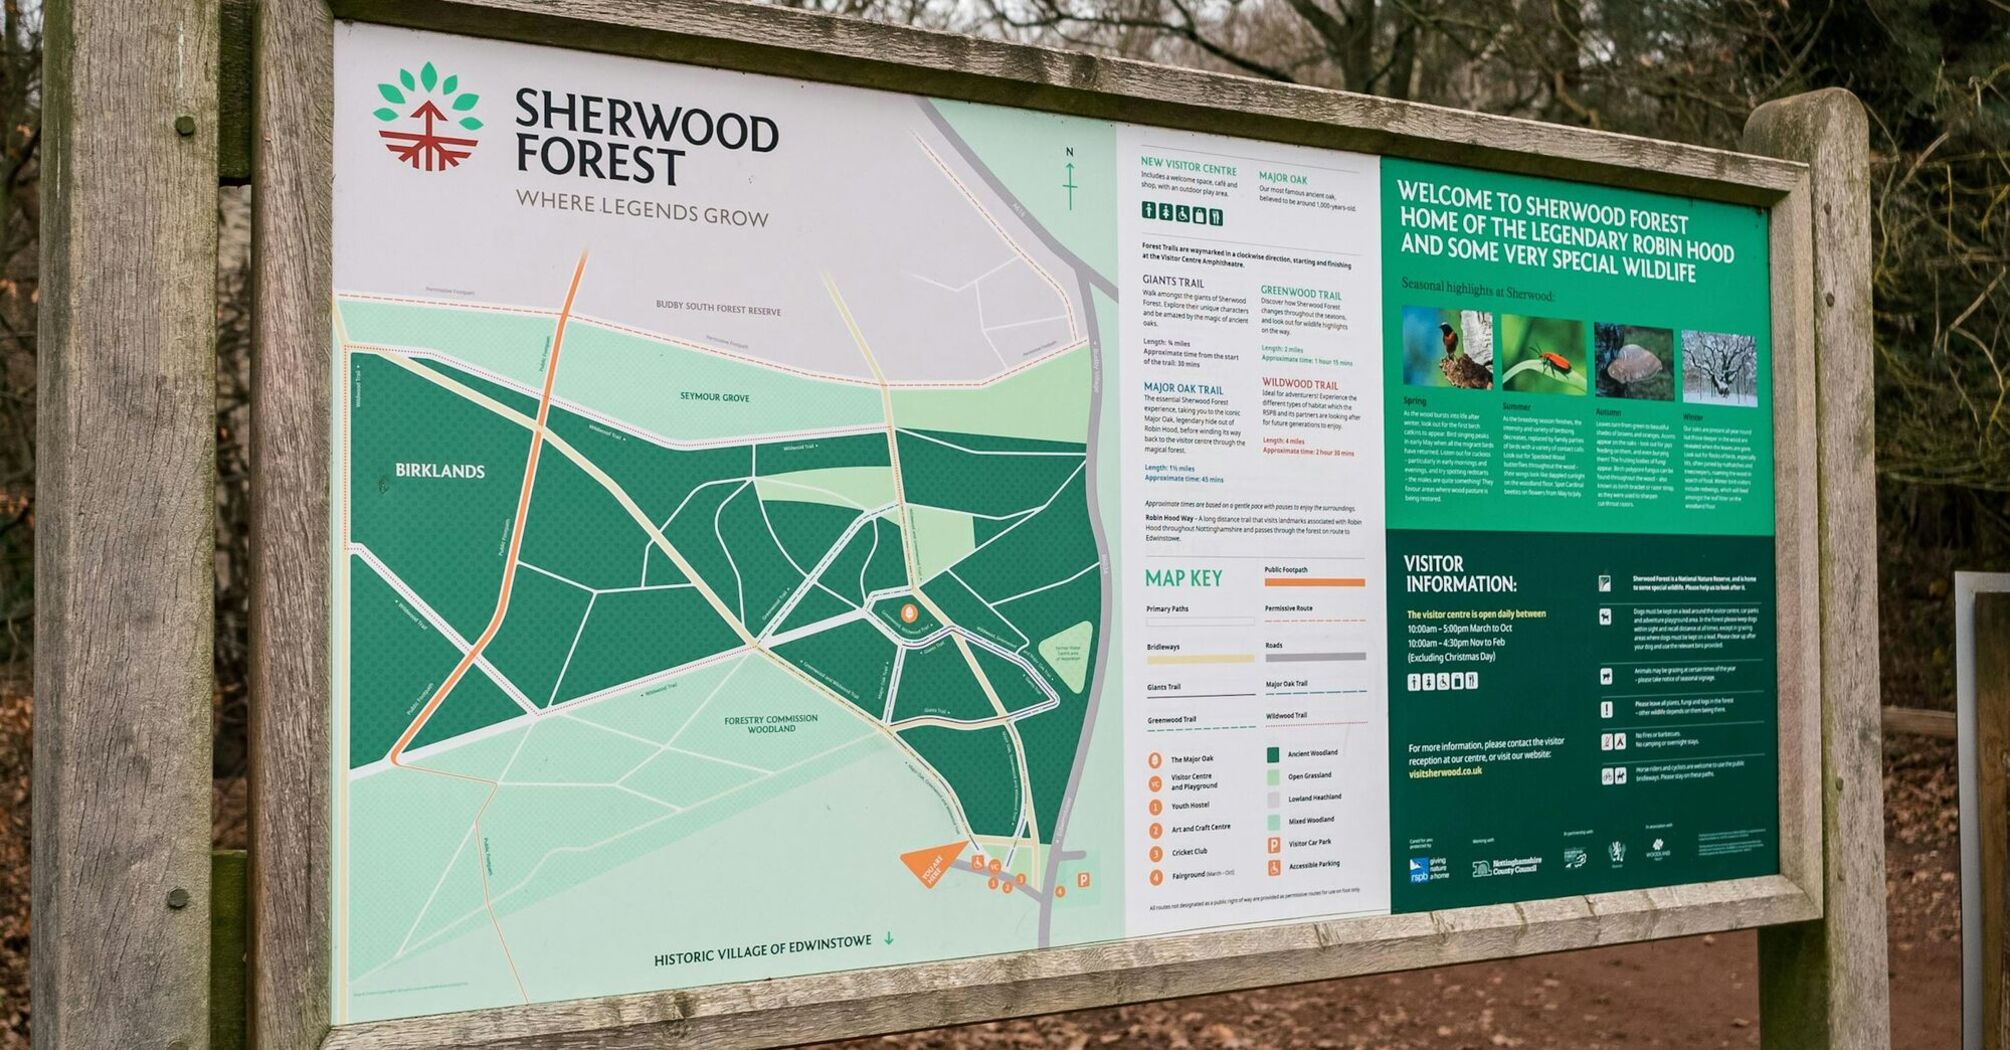 A detailed map of Sherwood Forest, highlighting the locations of key trails, visitor centers, and points of interest. The board also contains visitor information and highlights of seasonal wildlife in the forest